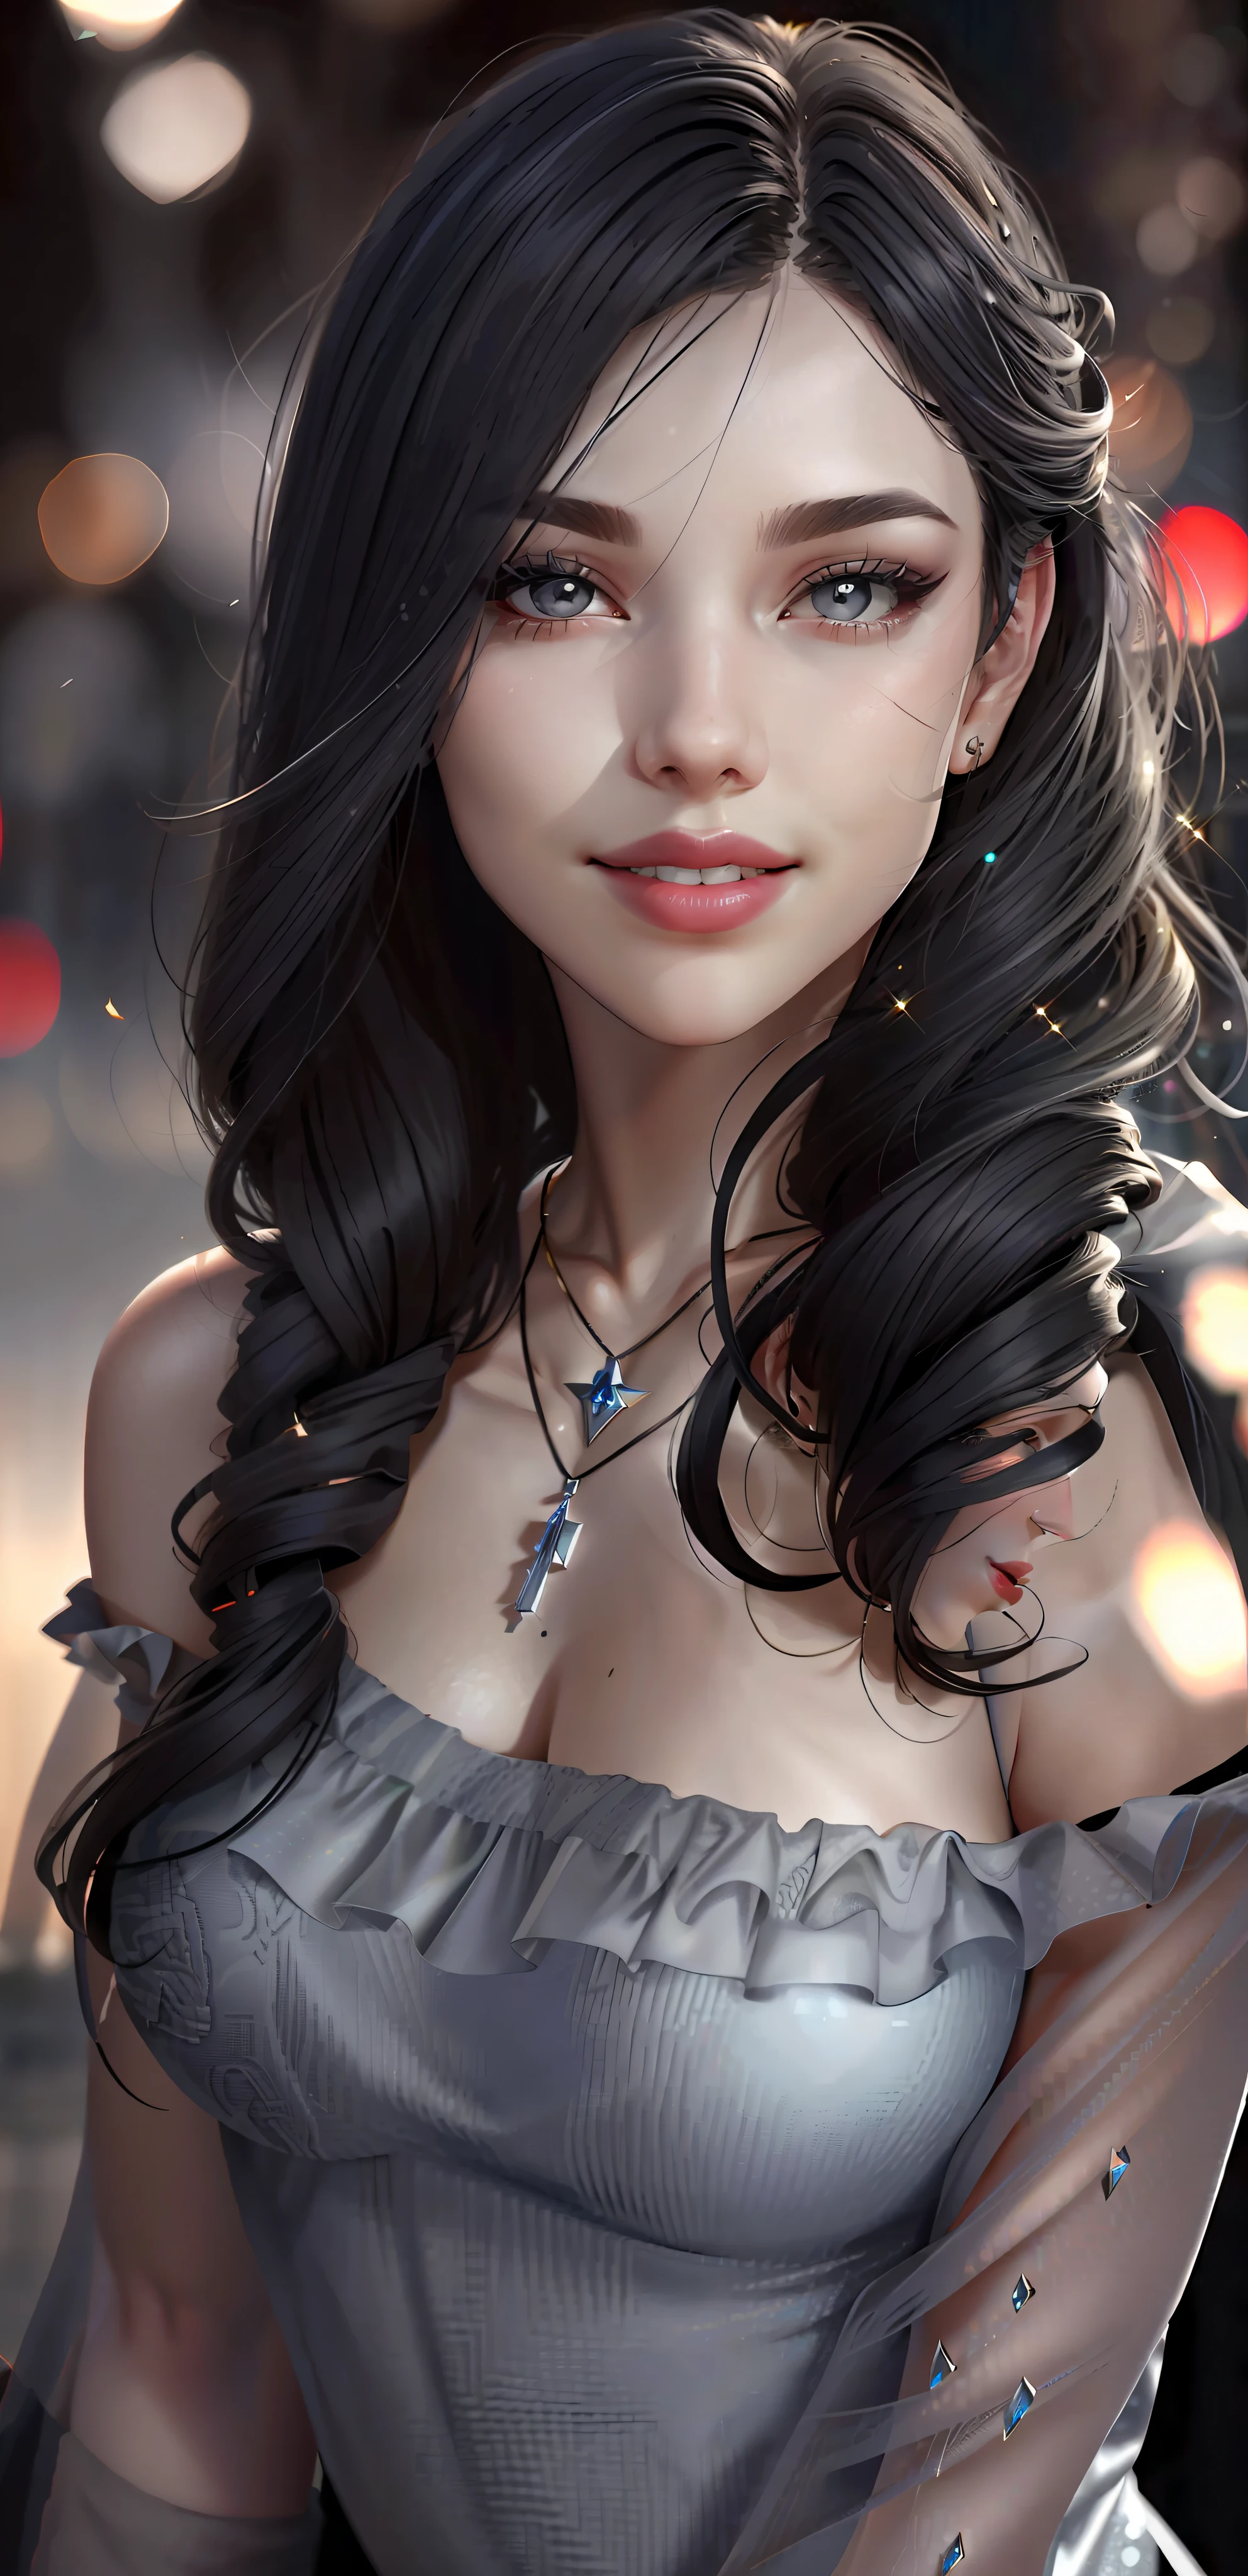 Best quality, masterpiece, high_res, girl, hair decoration, necklace, jewelry, beautiful detailed face, gray eyes, red full lips, big smile, face makeup, black hair, 
Short Hair, International Fashion, High Wear, Full Body Cover, Tight Dress, Full Body Detailed, Europe Effect, Multiplicity, Realistic Photos, Edge Lighting, Two-Tone Lighting, (High Detail Skin: 1.2), 8K UHD, DSLR, Soft Lighting, High Quality, Volumetric Lighting, Candid, Photography, High Resolution, 4K, 8K, Bokeh, Ridiculous,